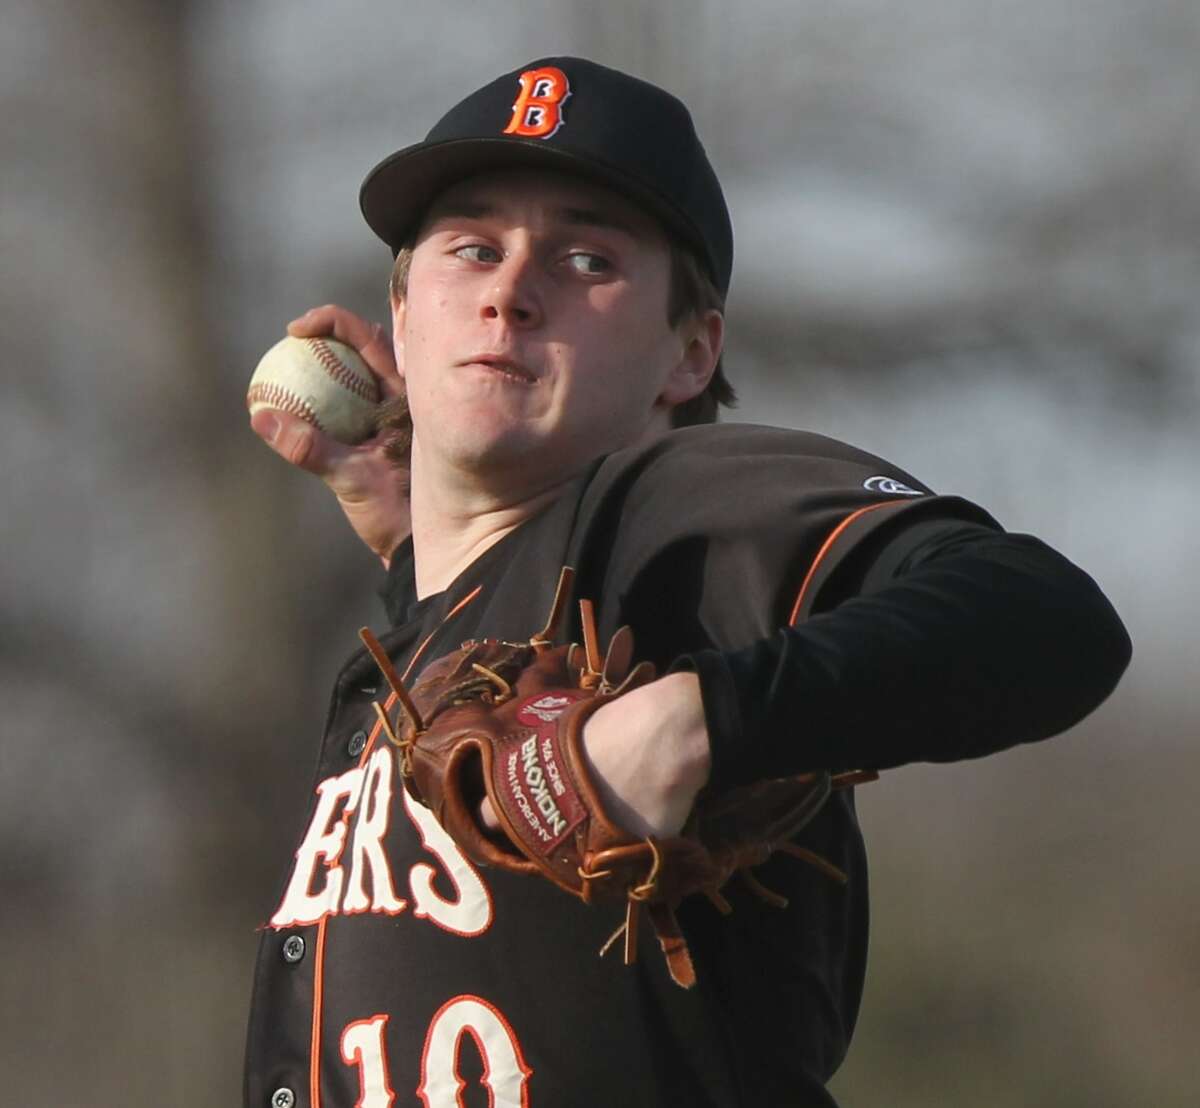 Beardstown's Jacob Pate delivers a pitch during a baseball game against Augusta Southeastern at Beardstown Friday afternoon.